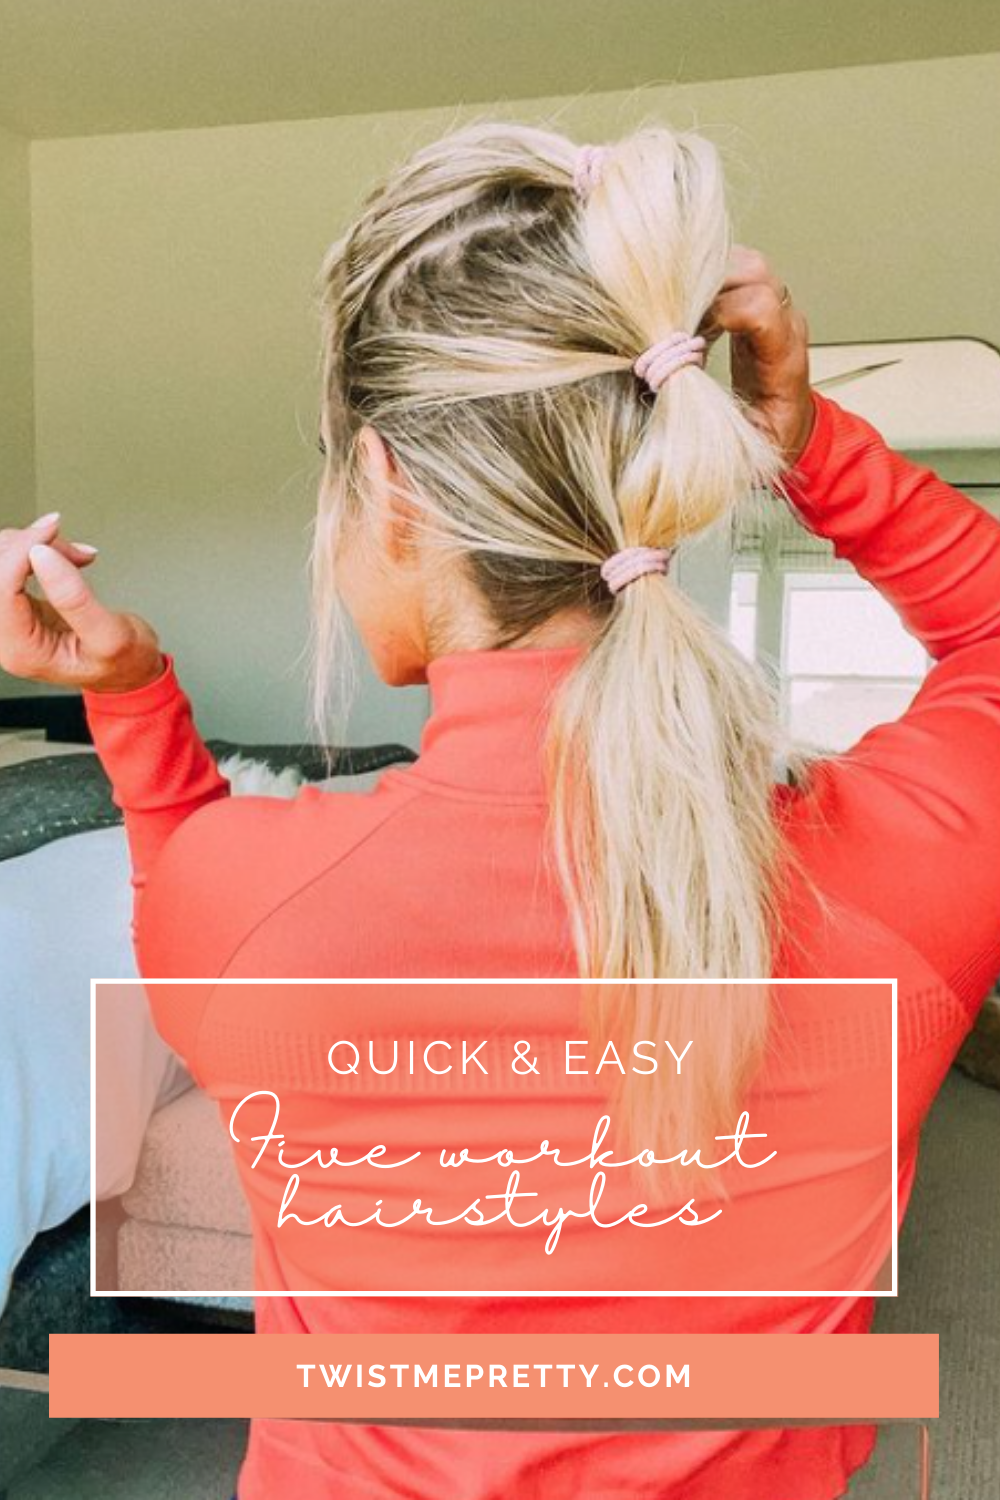 Check out these cute hairstyles you can wear when working out. www.twistmepretty.com